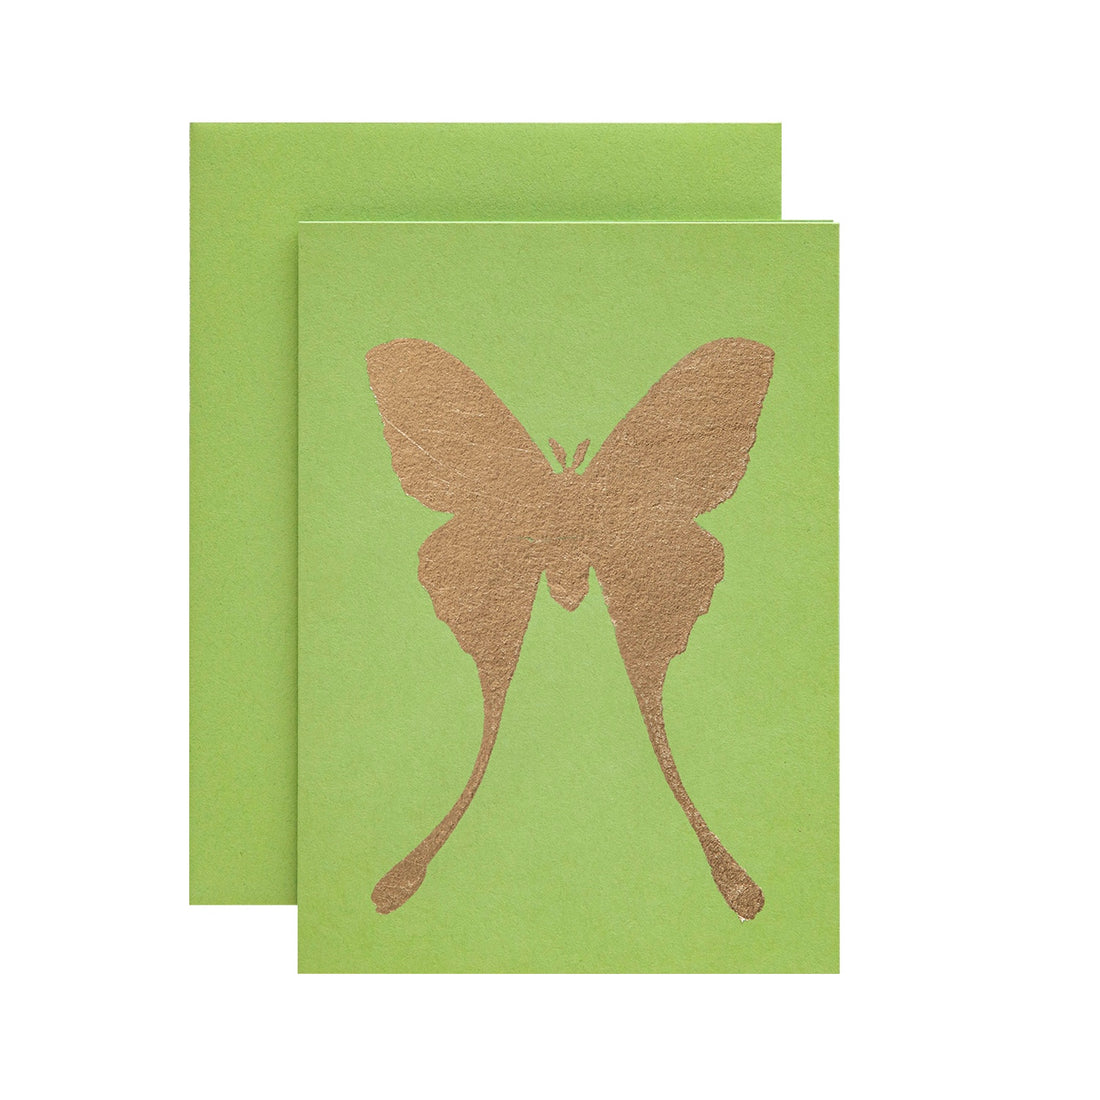 A lime green card featuring the silhouette of a moth with long trailing wings in solid gold leaf.